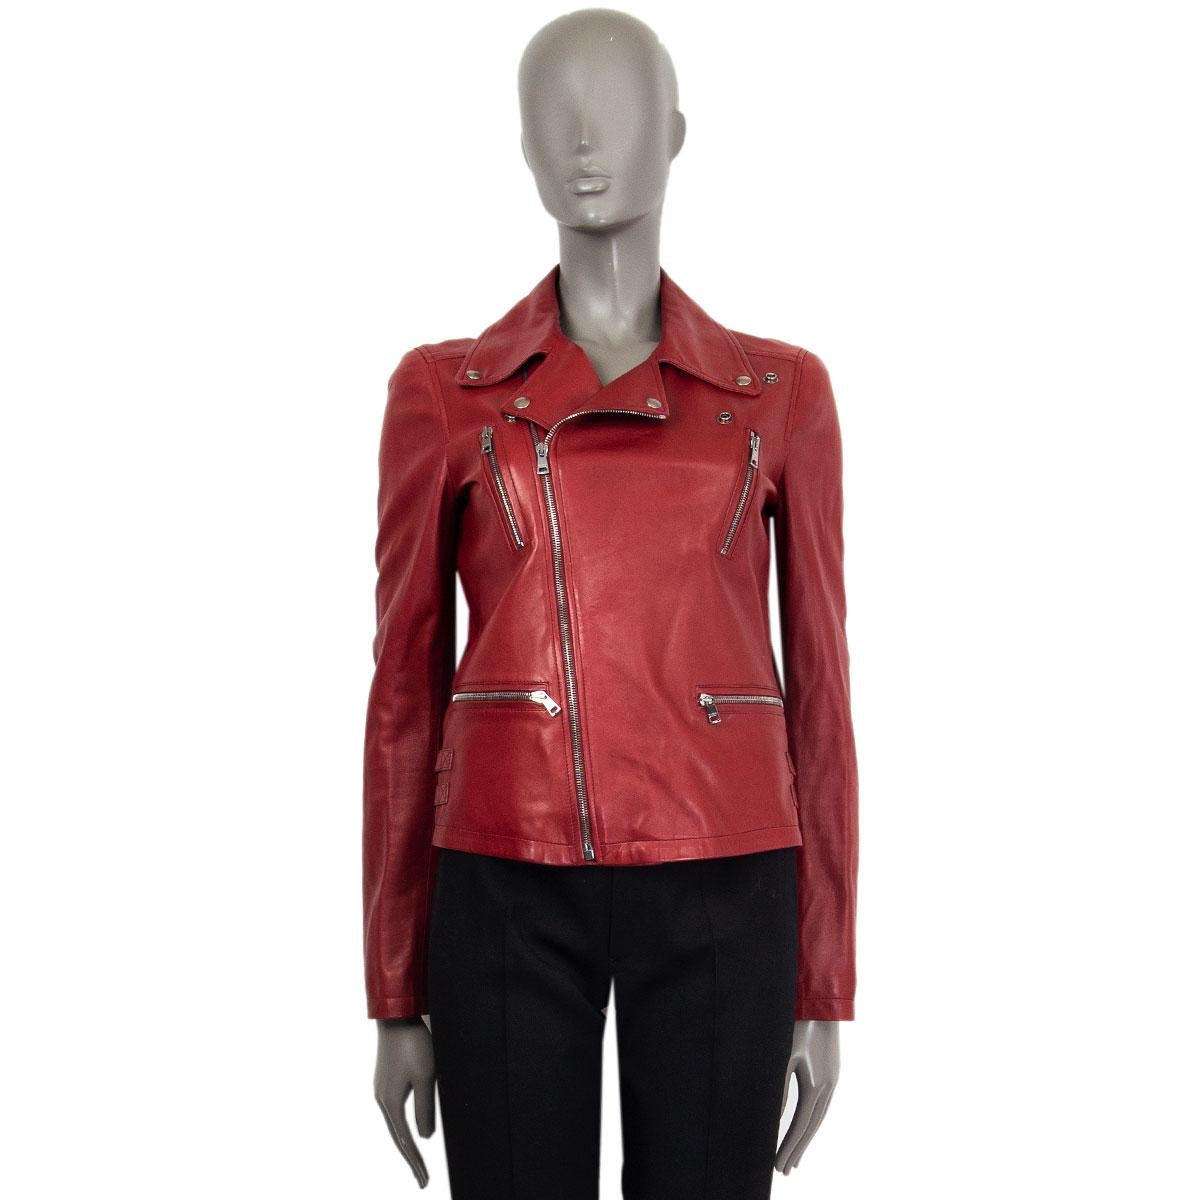 Gucci biker jacket in dark red lamb leather with four front zipper pockets, side decorative belts and zipped cuffs. Closes on the front with a zipper. Lined in cotton (100%). Shows sings of wear around the inner collar and on the front of the jacket